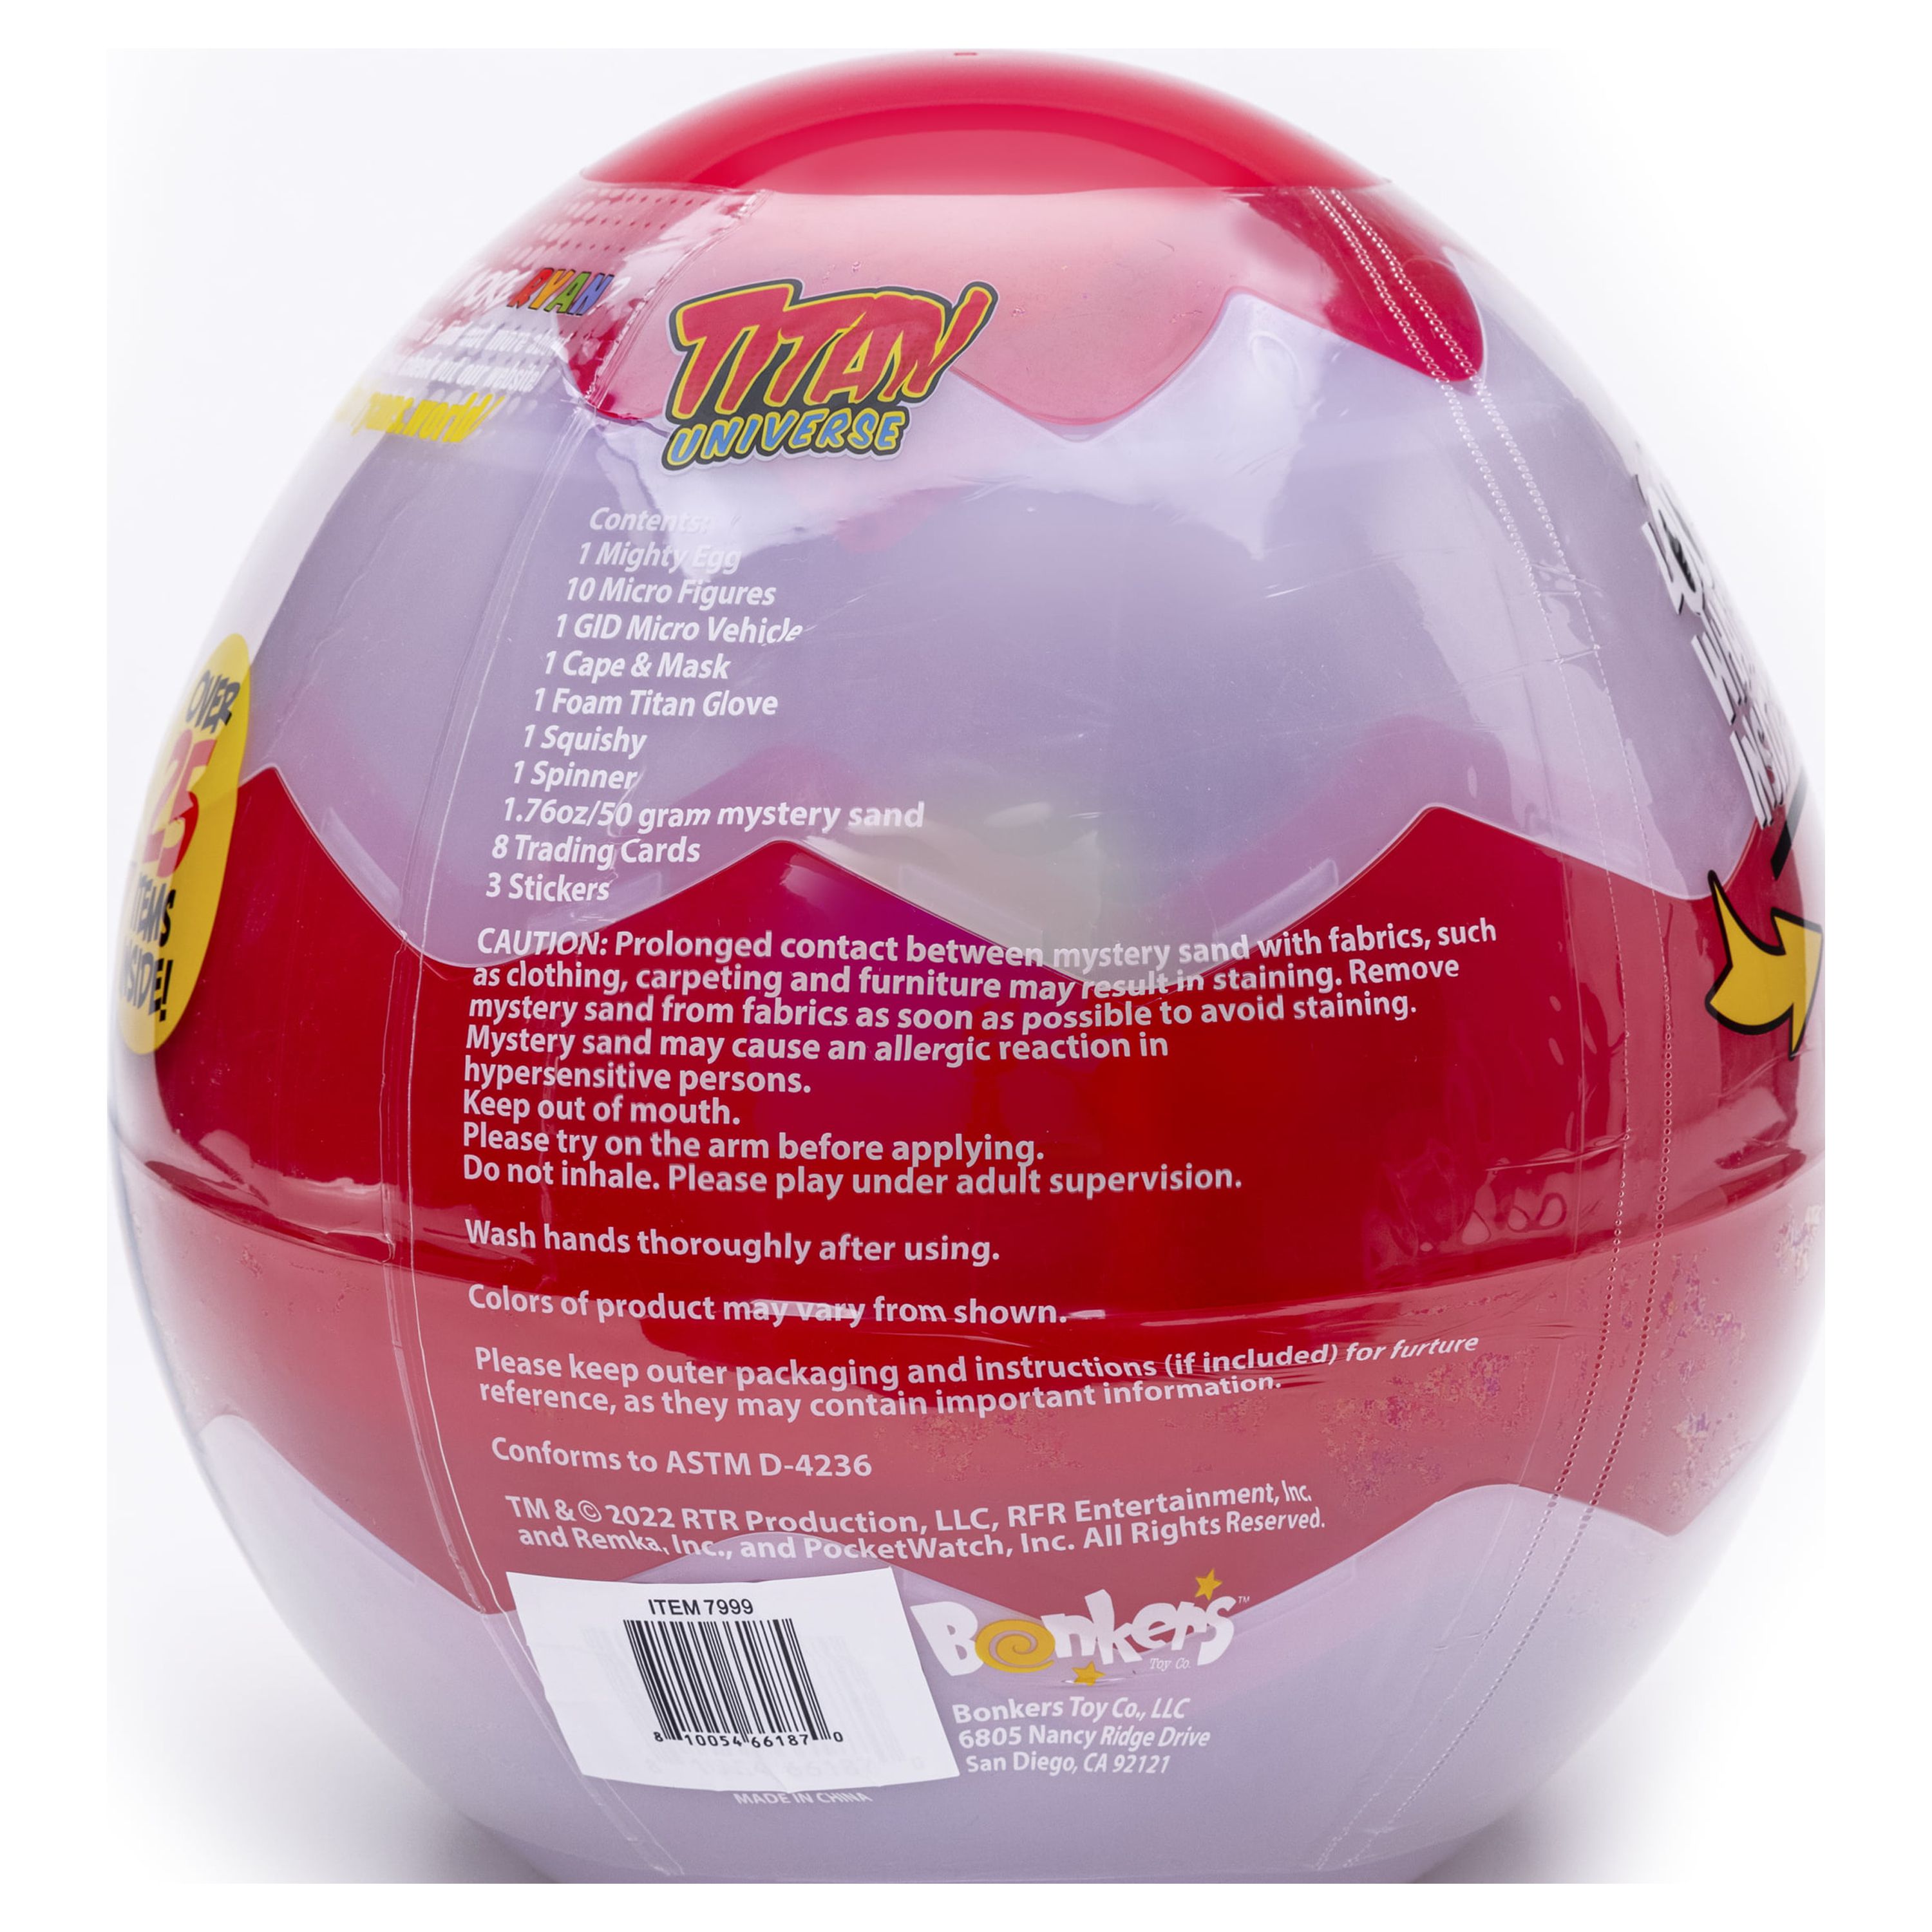 Ryans World Mighty Mystery Egg - image 4 of 9